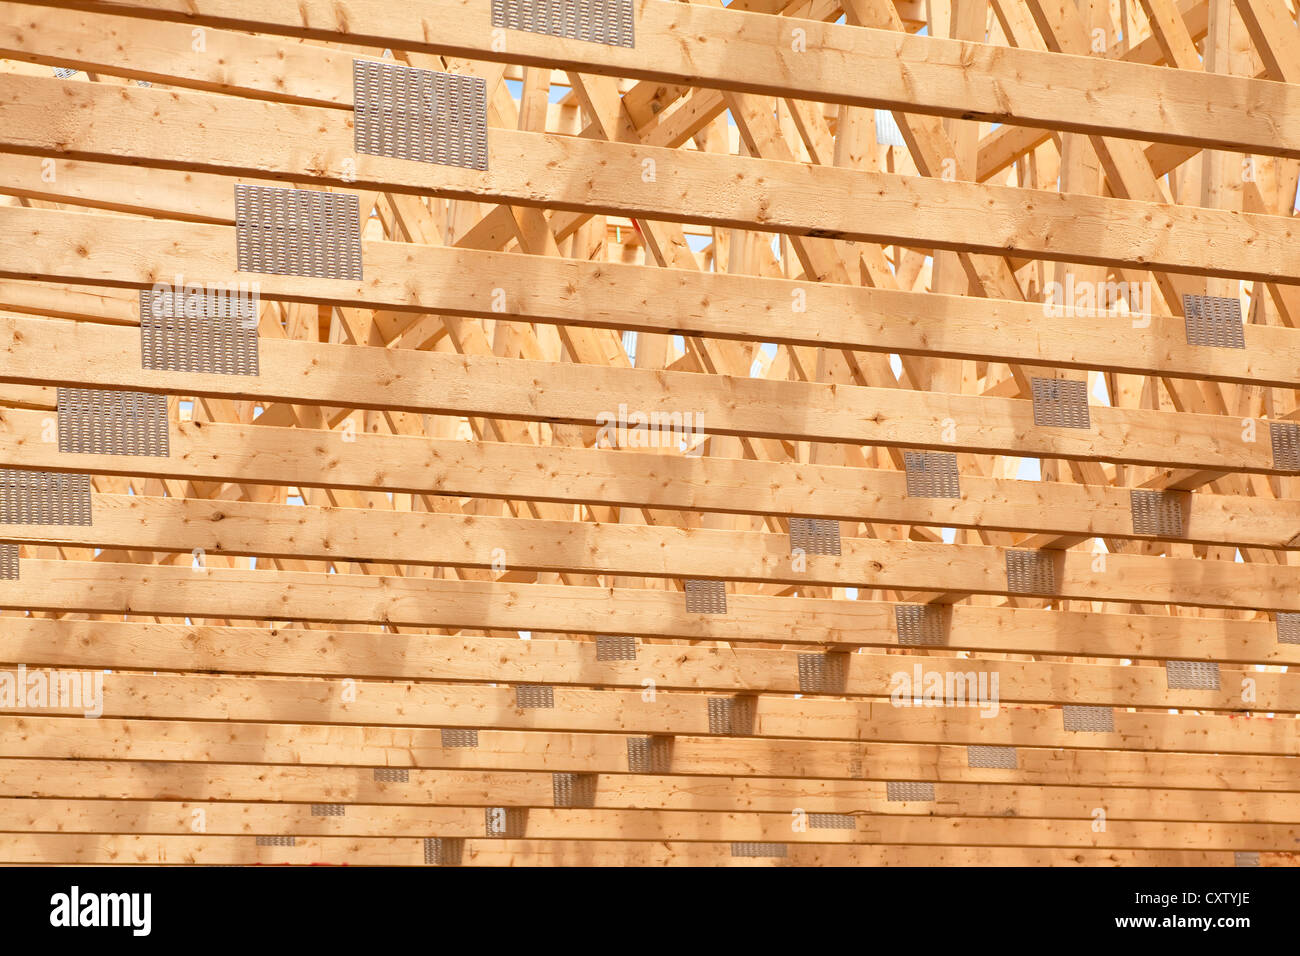 Roof rafters in the new construction of a wooden building or house. Stock Photo